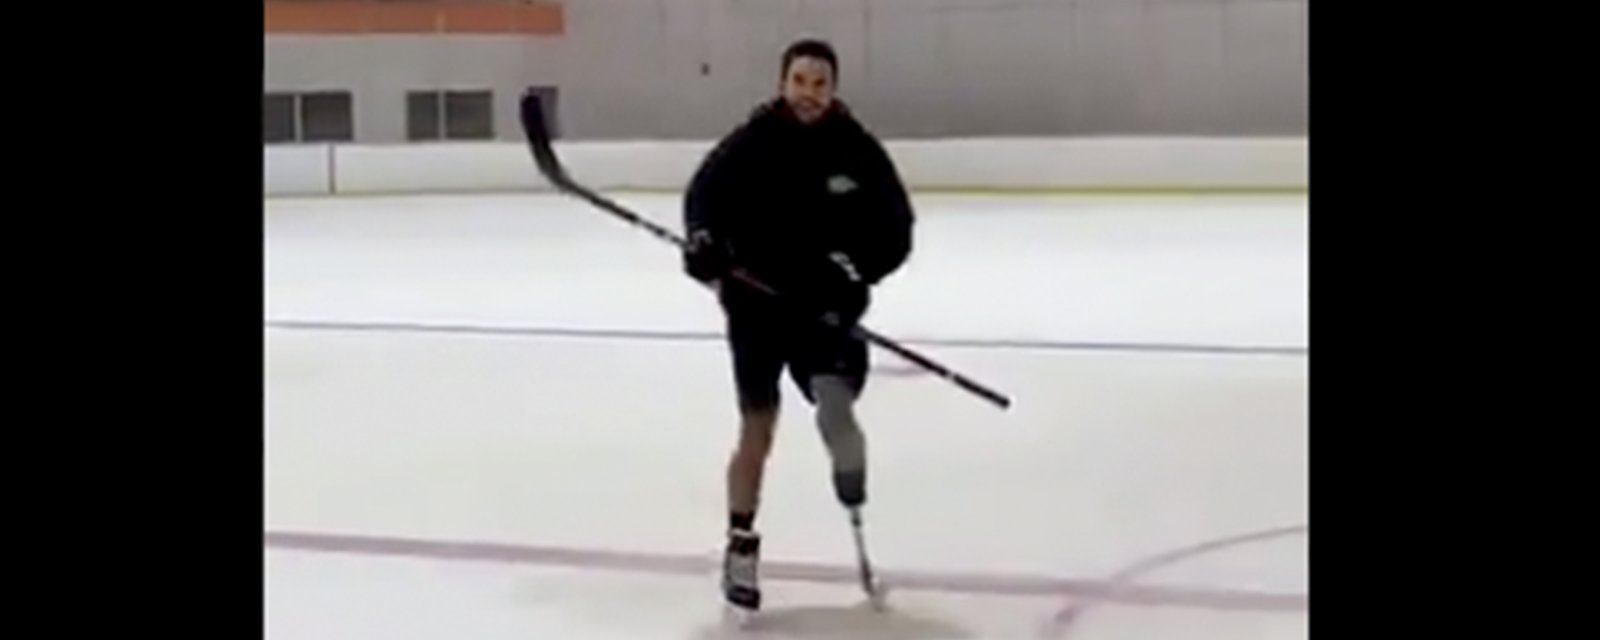 Two years after having his leg amputated, former NHLer Craig Cunningham is back on the ice